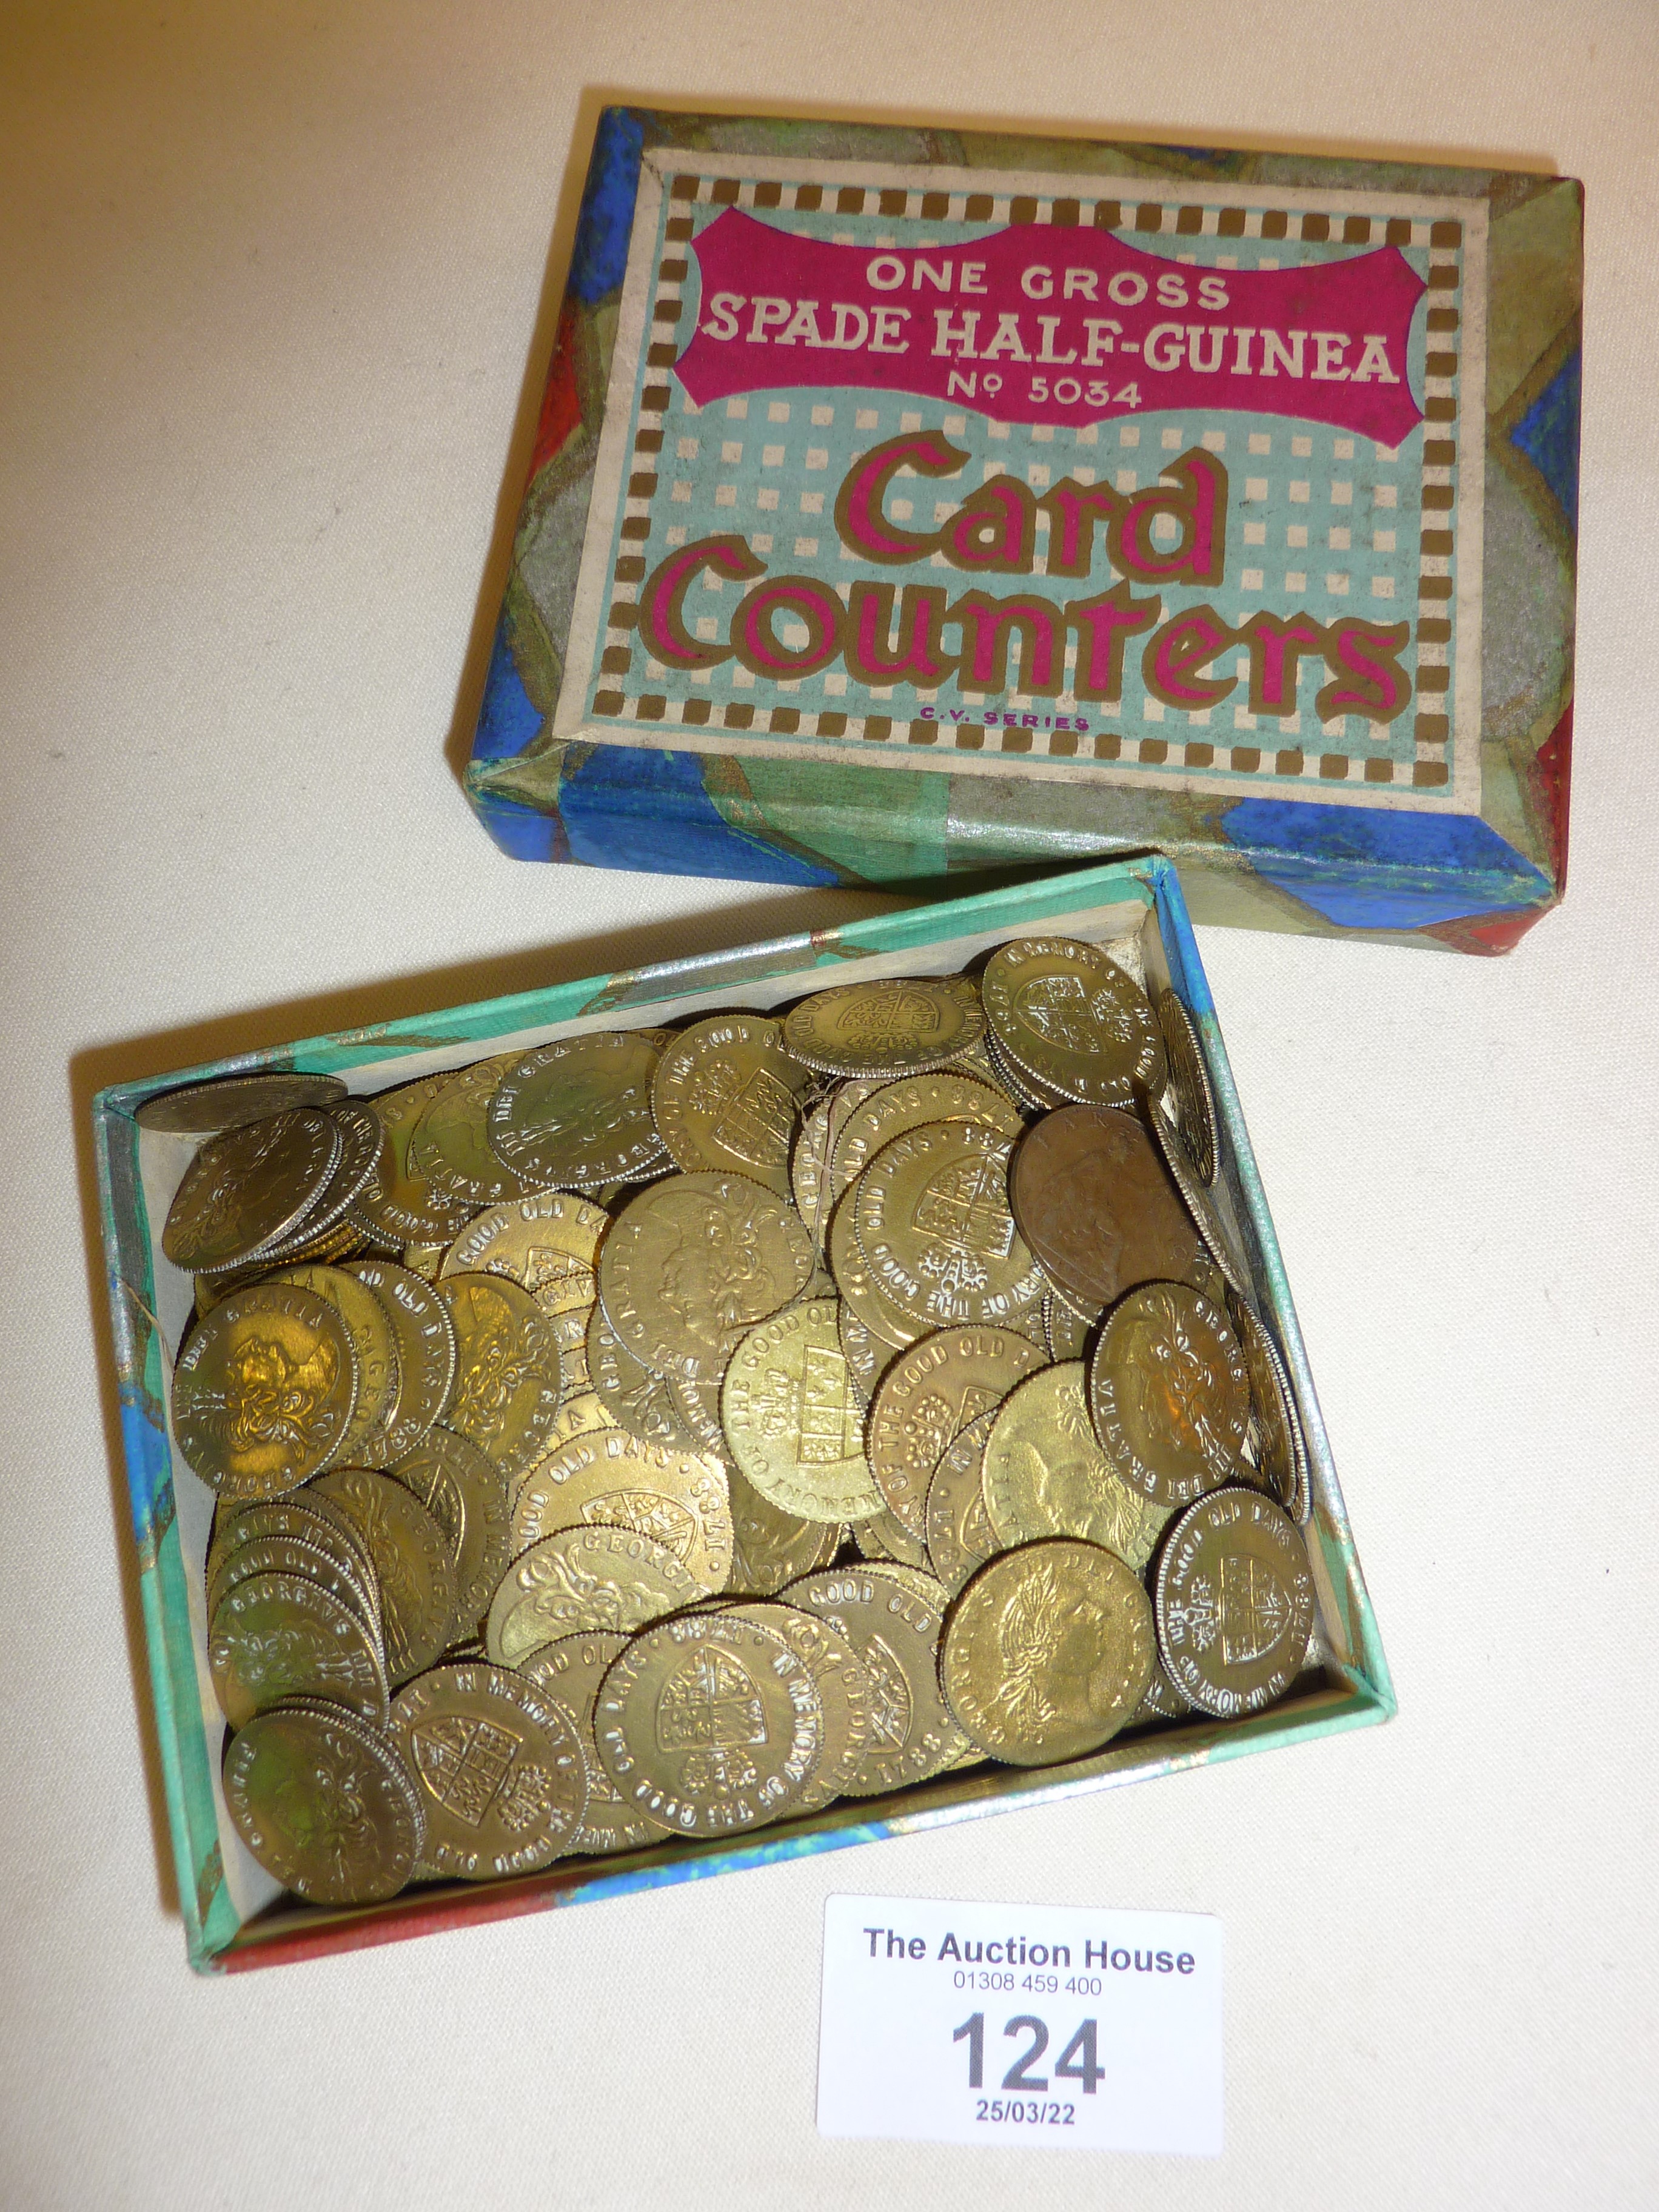 Boxed collection of Spade half guinea coin style gaming tokens